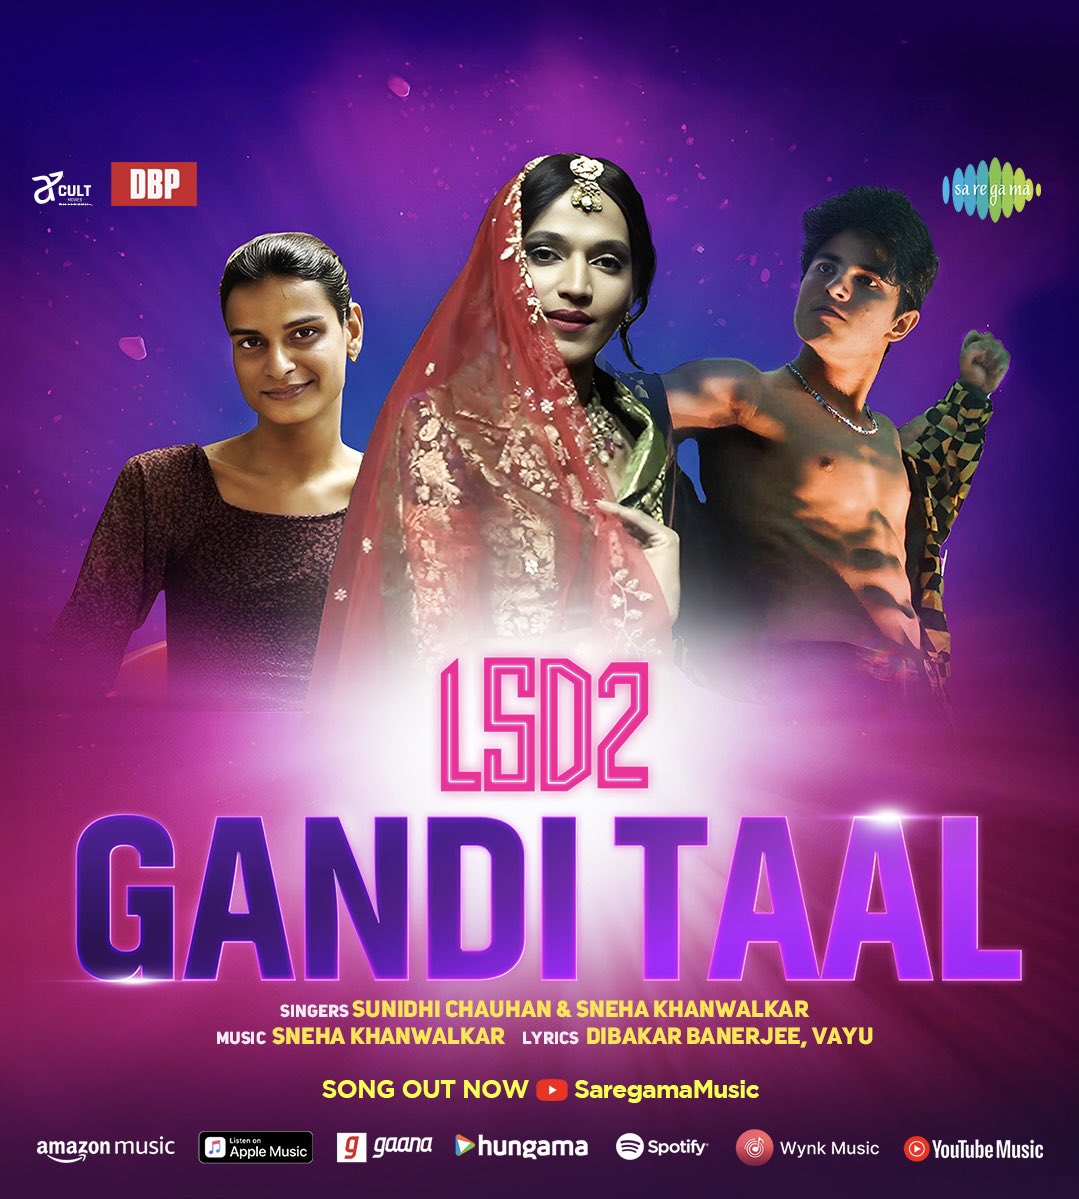 EKTAA KAPOOR - DIBAKAR BANERJEE UNVEIL ‘LOVE SEX AUR DHOKHA 2’ NEW SONG UNVEILS… 19 APRIL RELEASE… #GandiTaal - the third song from #LSD2: #LoveSexAurDhokha2 - is out now.

🔗: bit.ly/GandiTaal

Directed by #DibakarBanerjee, #LoveSexAurDhokha2 is produced by…